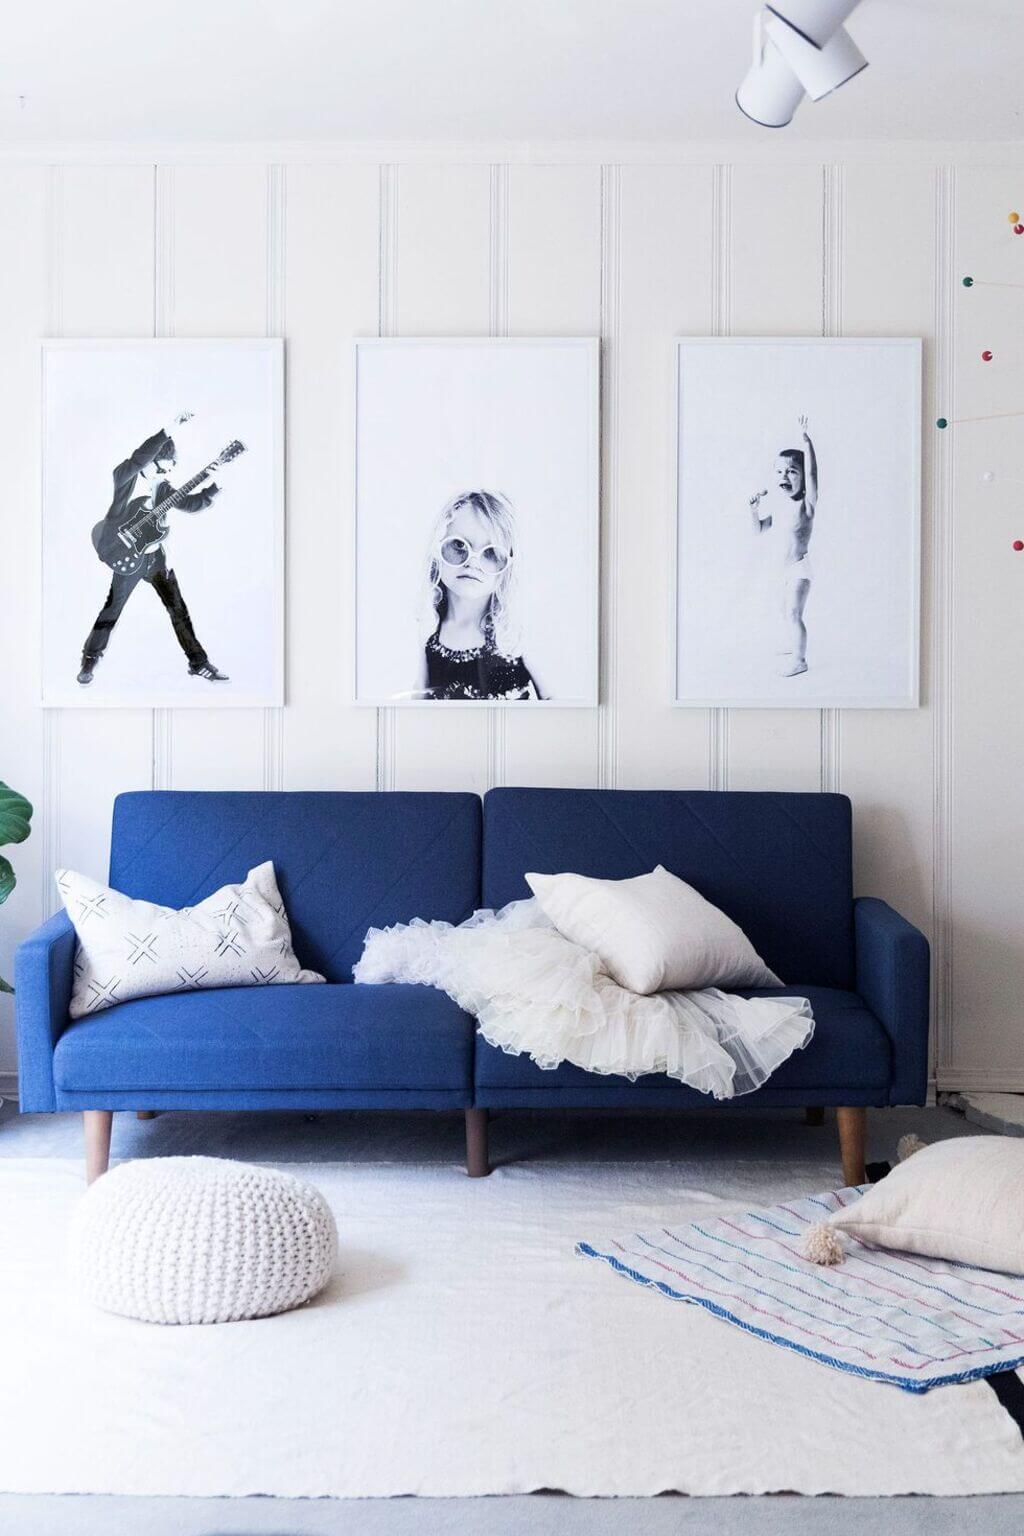 A living room with a blue couch and pictures on the wall
